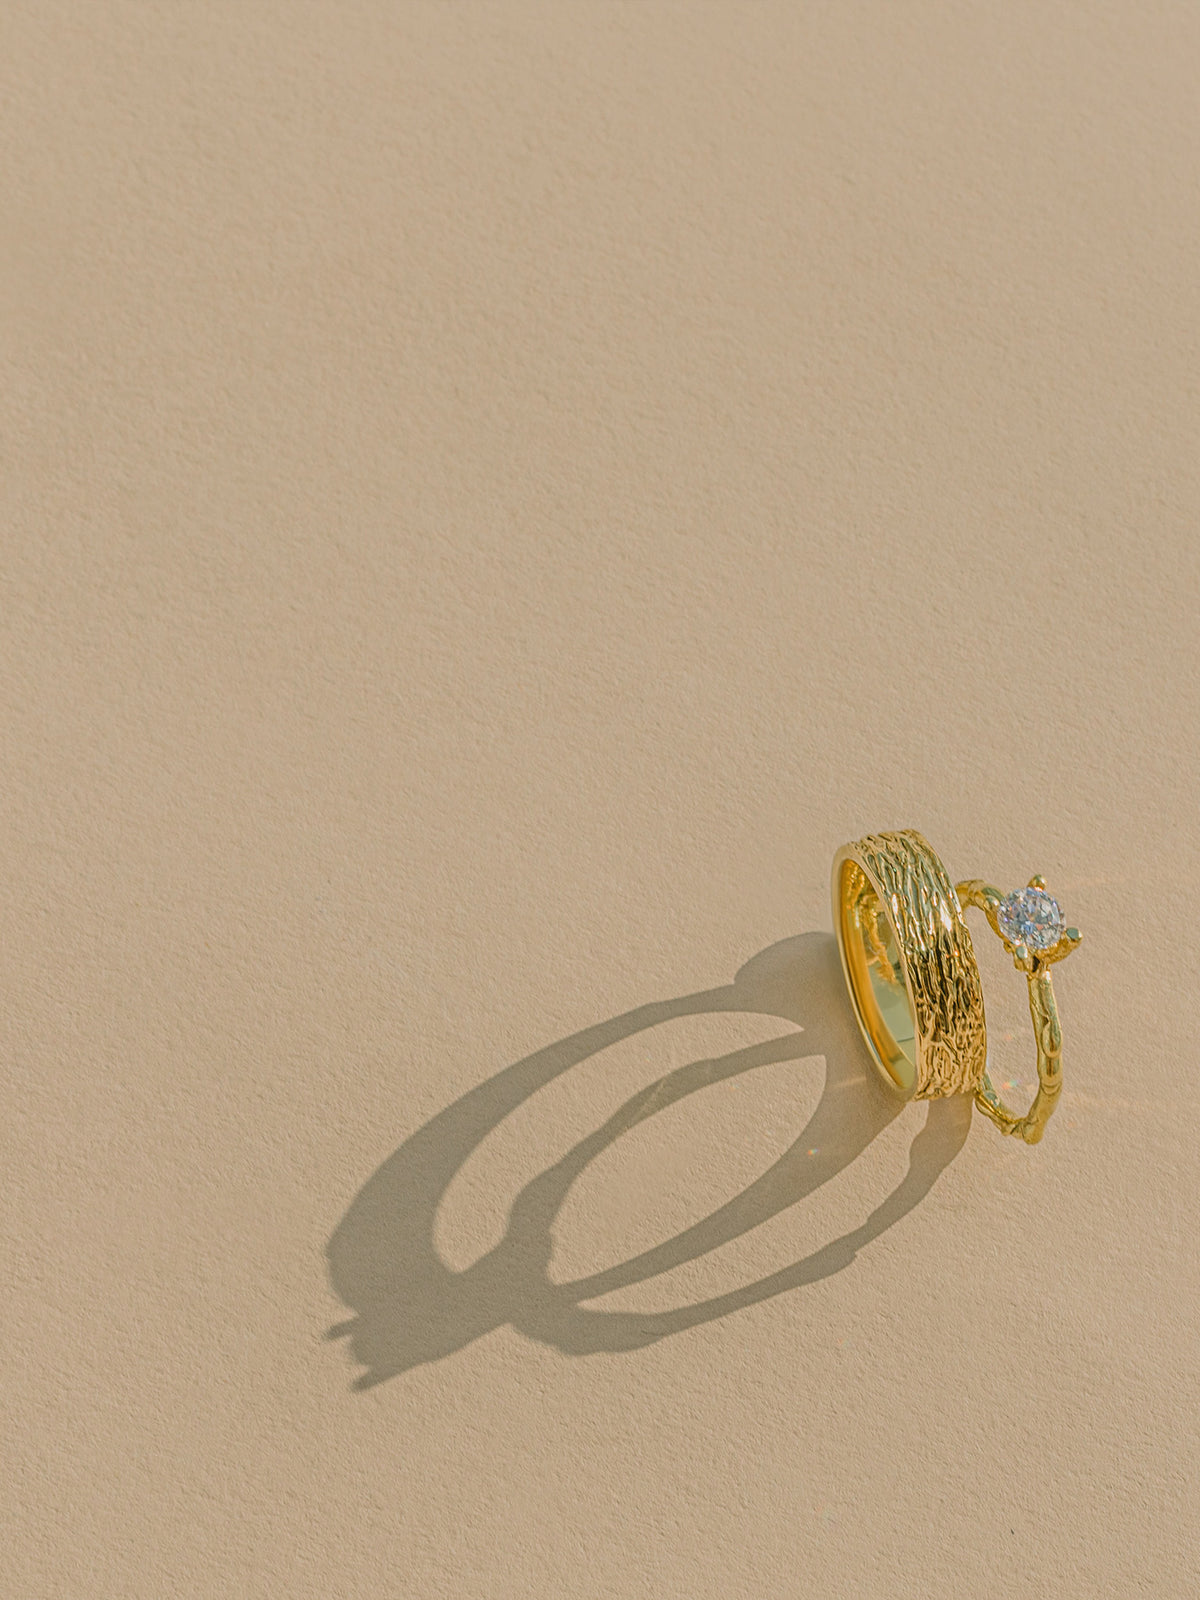 Coral Reef Wedding Band / Gold